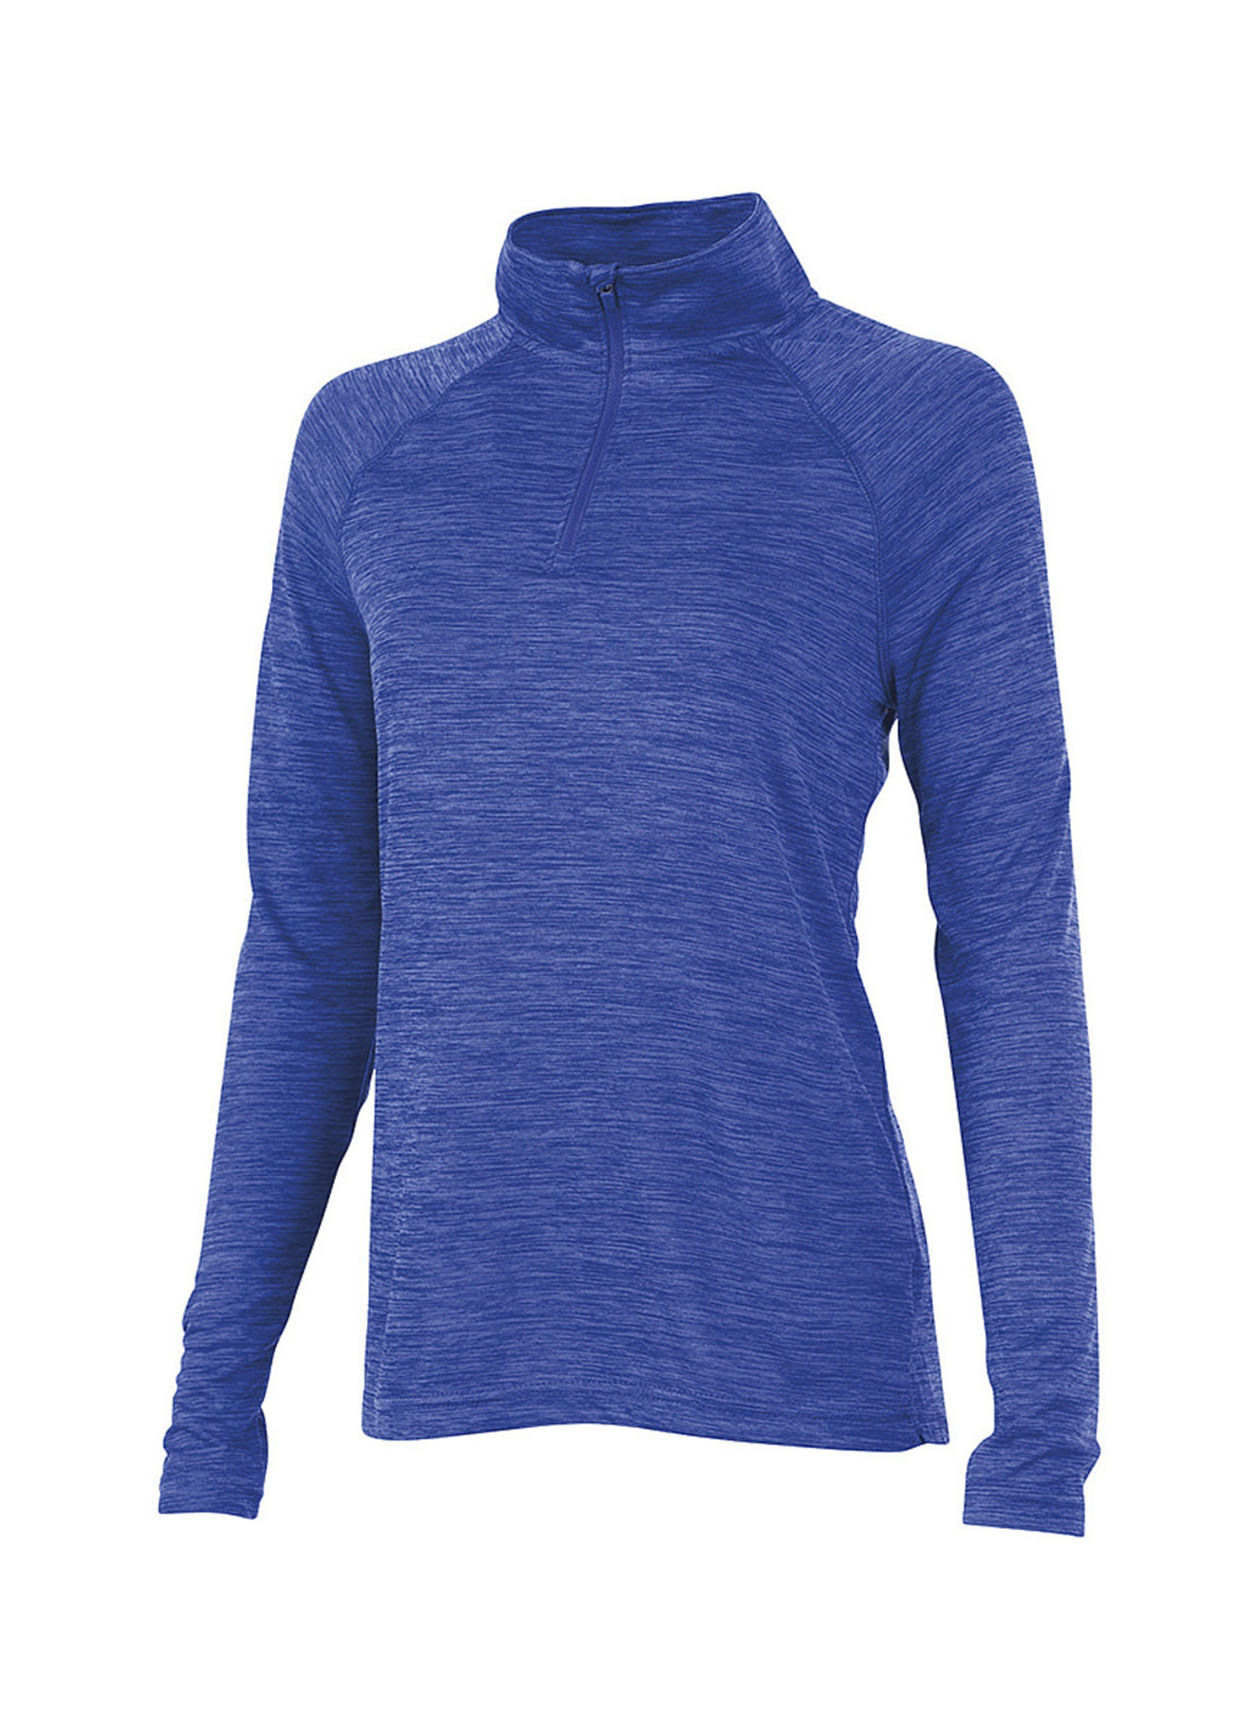 Charles River Women's Royal Space Dyed Quarter-Zip